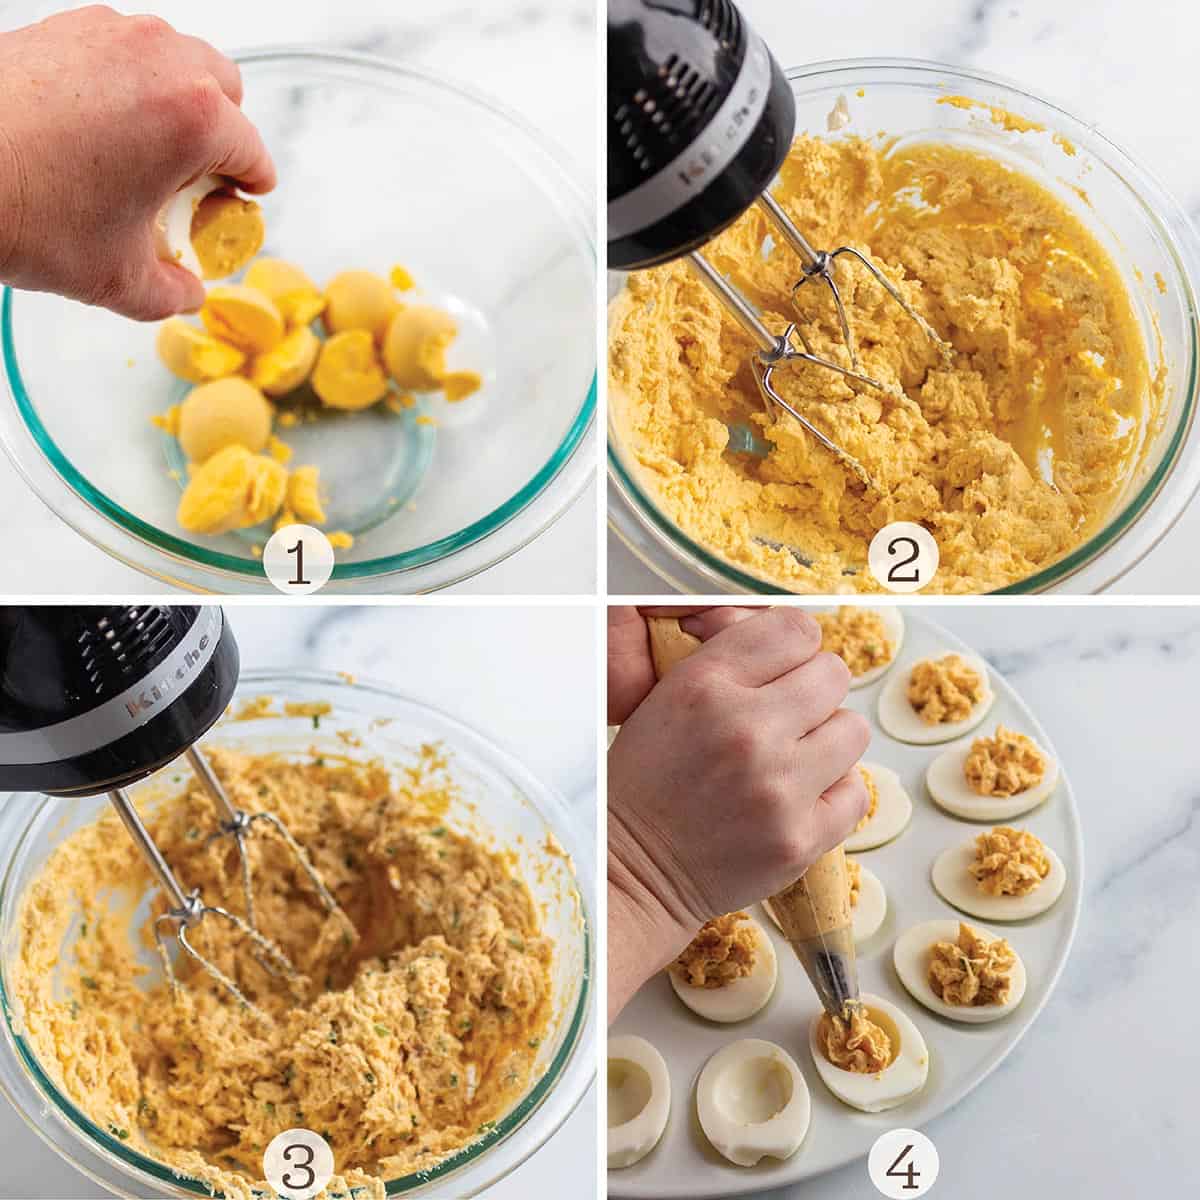 Four images of step-by-step making deviled eggs.